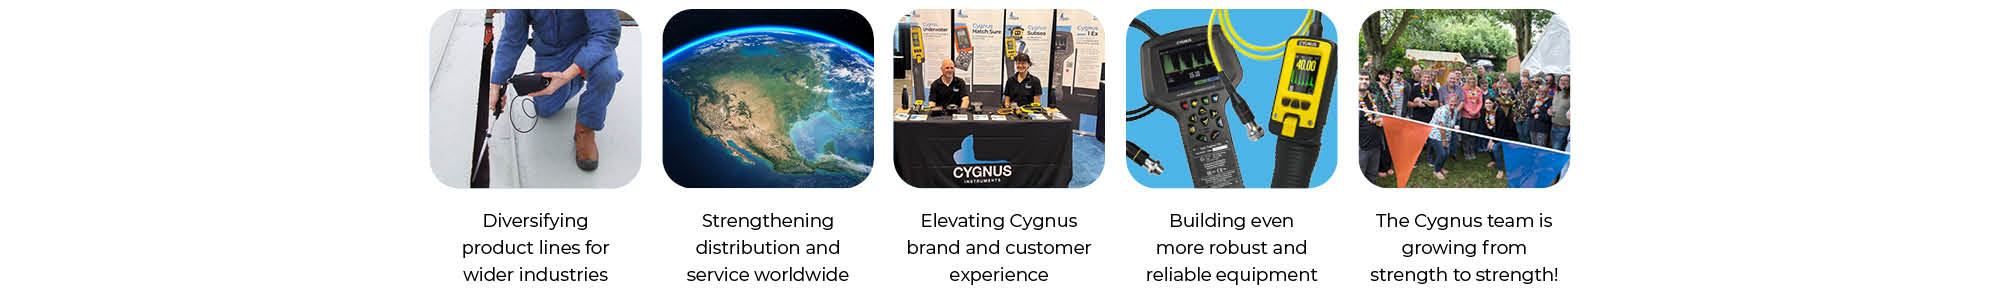 Our Story | Cygnus Instruments